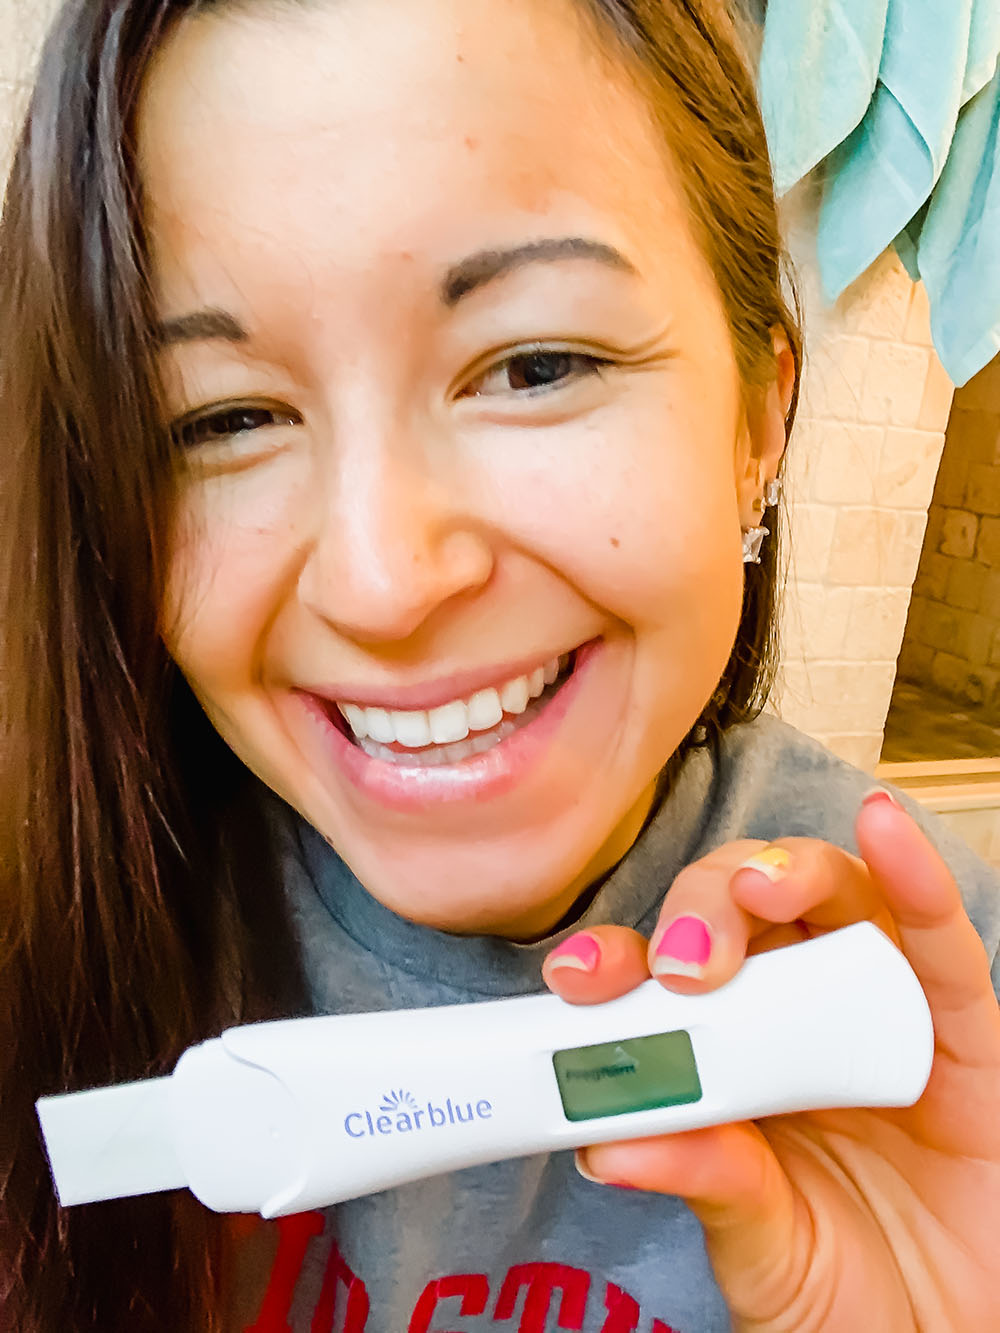 Getting Pregnant on the First Try: how I found out + 2 week wait symptoms